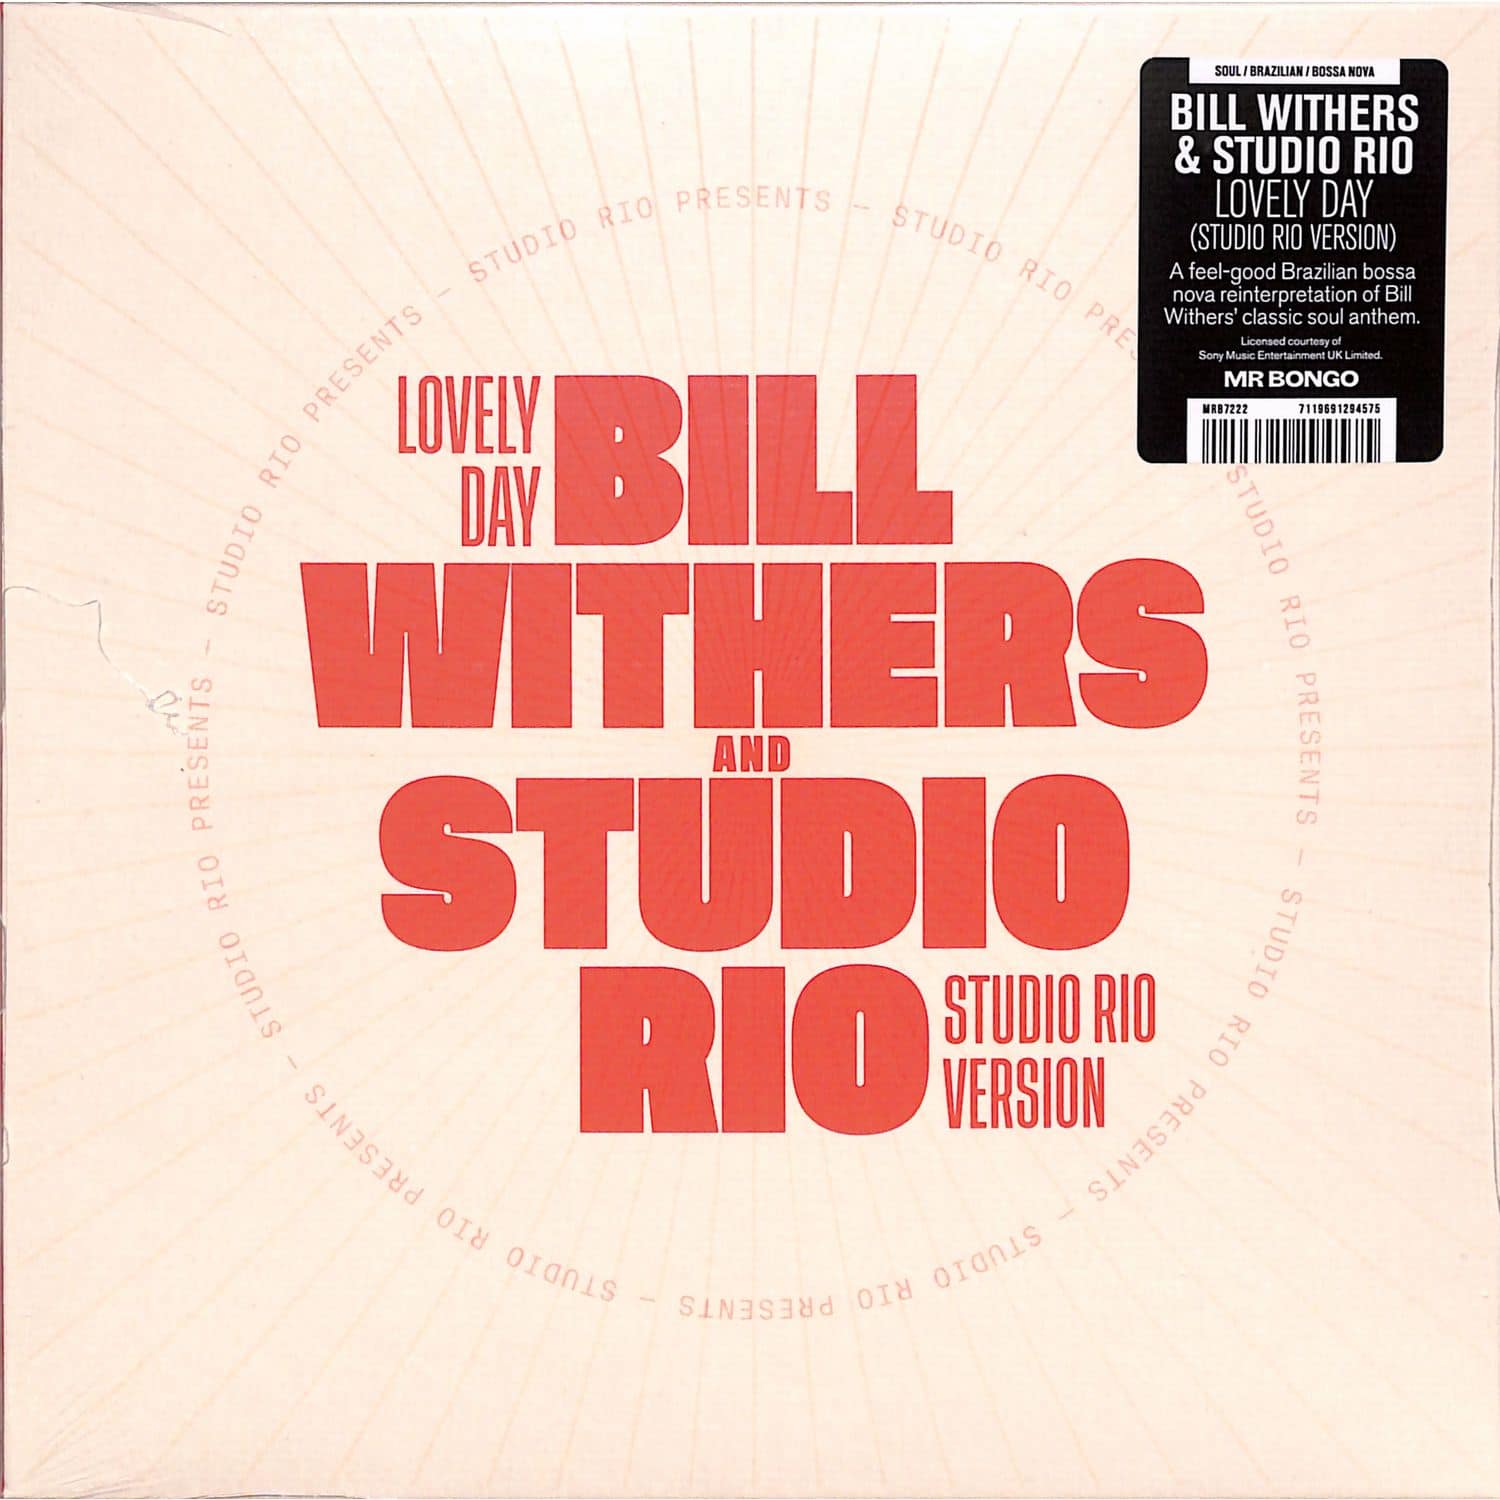 Bill Withers & Studio Rio - LOVELY DAY 